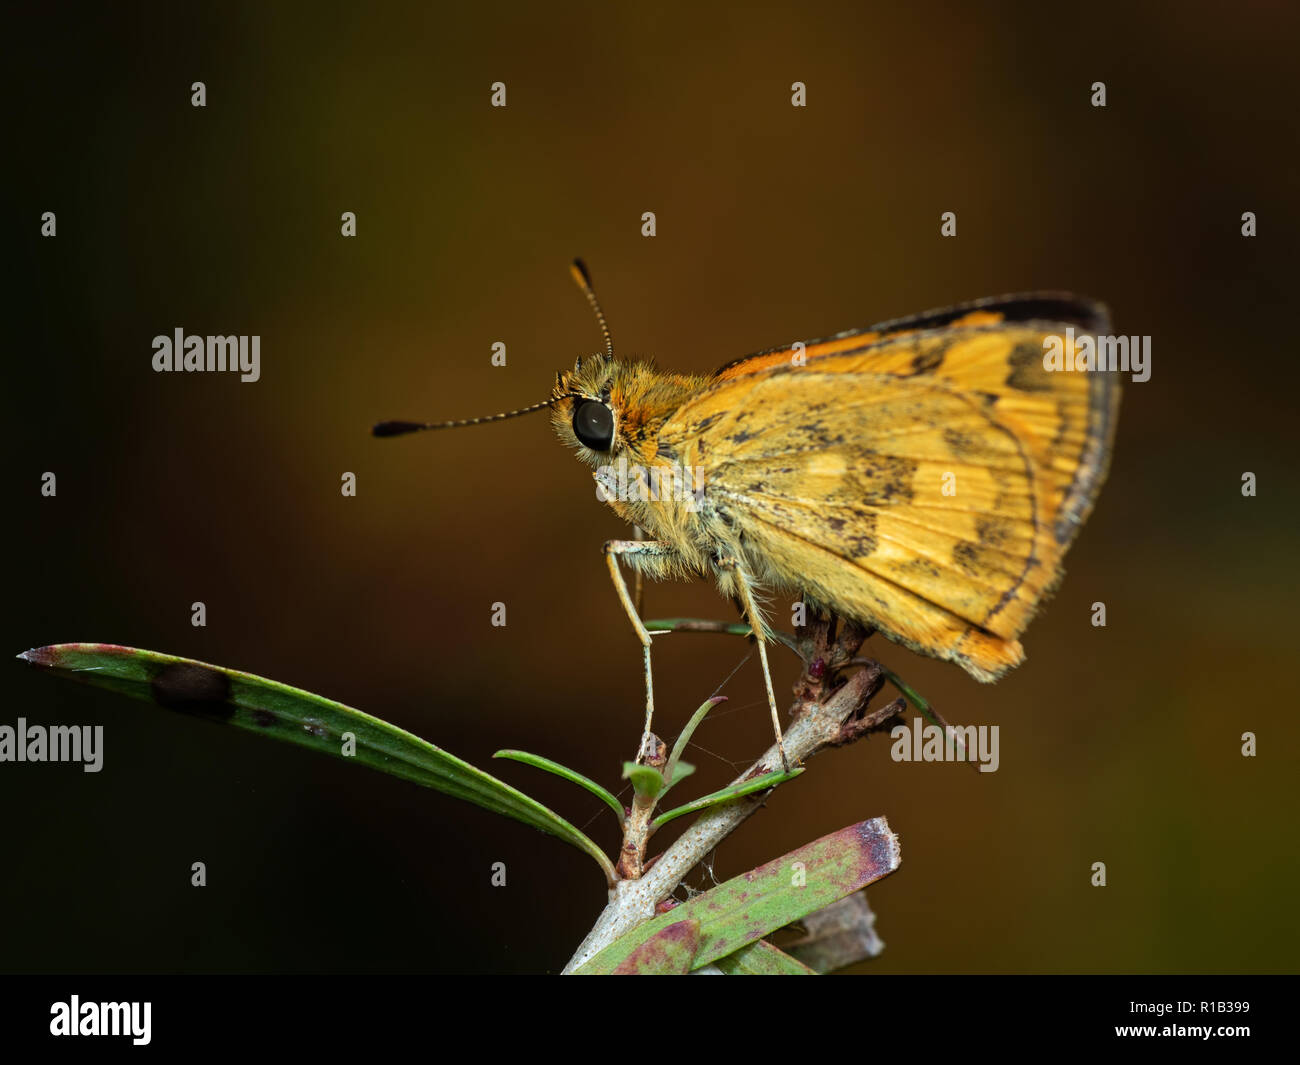 Macro Photography of Yellow Butterfly on Twig of Plant Stock Photo